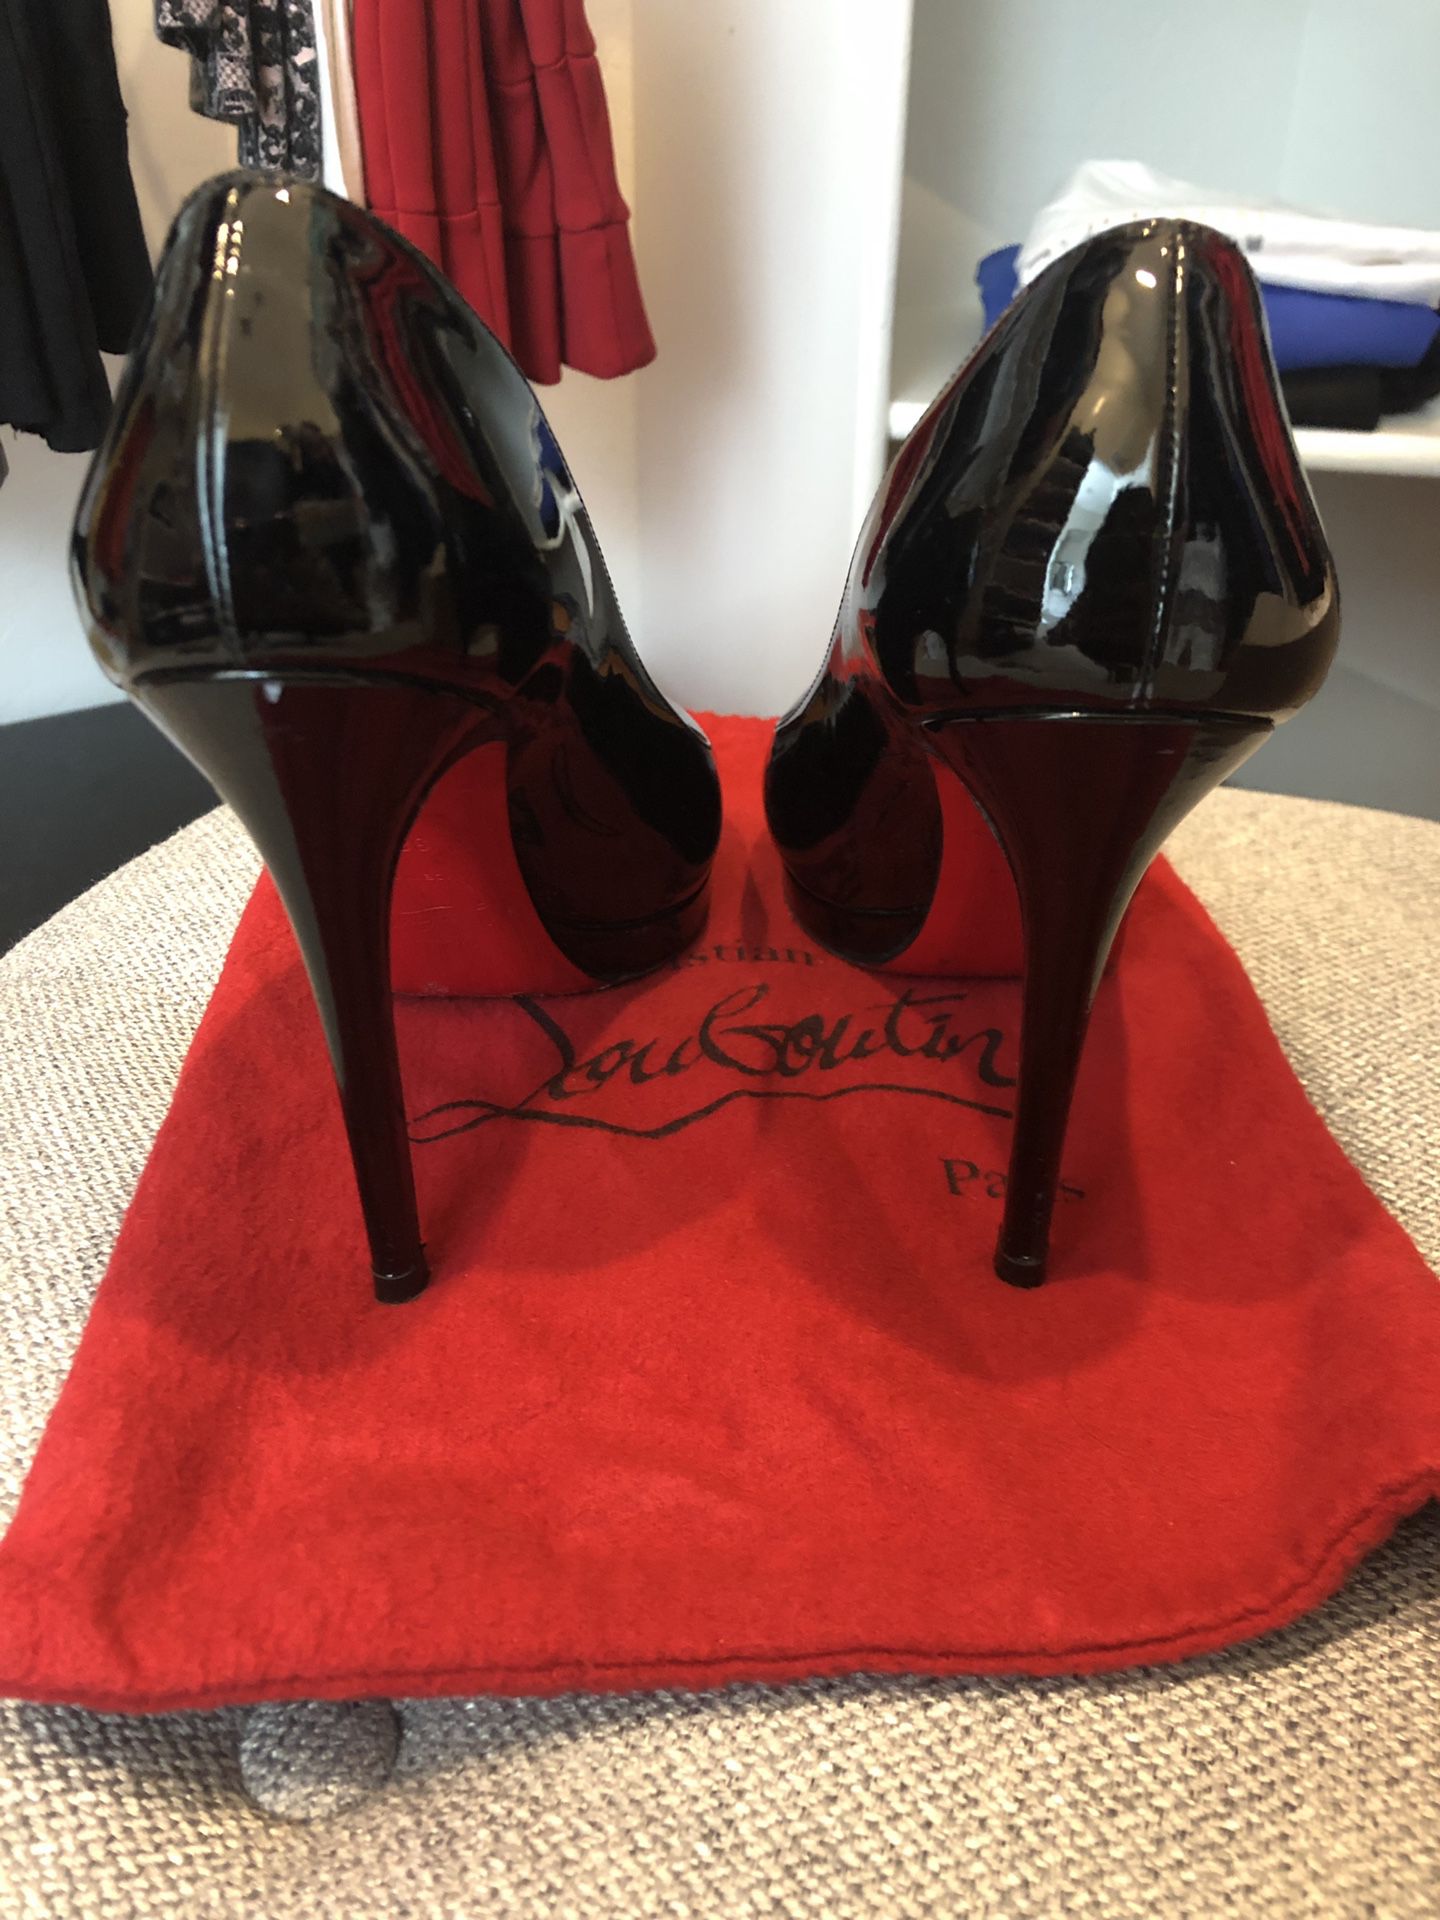 Christian Louboutin, Shoes, Christian Louboutin New Simple Pump 2 Patent  Calf In Black Size 38 8